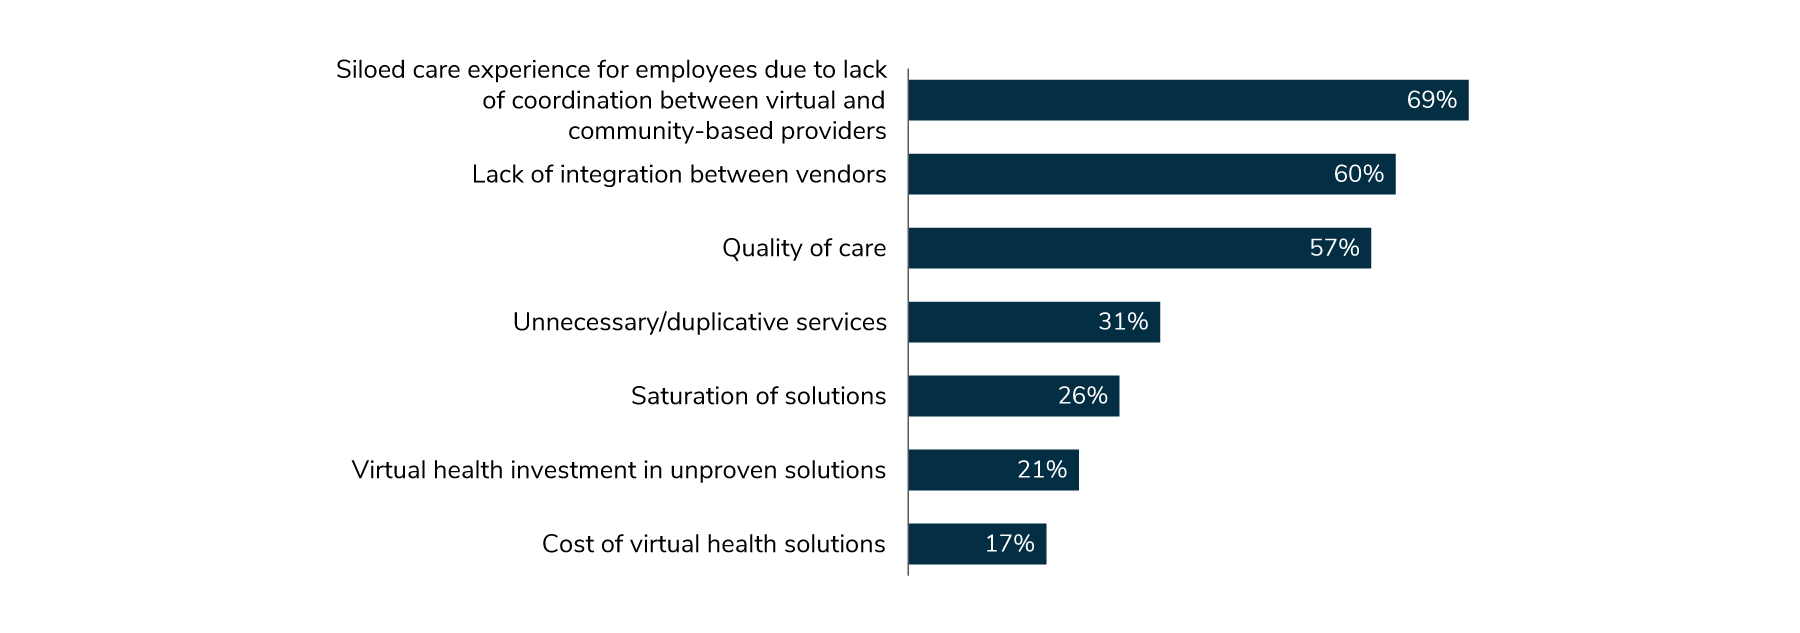 Employers concerns with virtual health include: siloed care experience (69%), lack of integration with vendors (60%) and quality of care provided (57%).